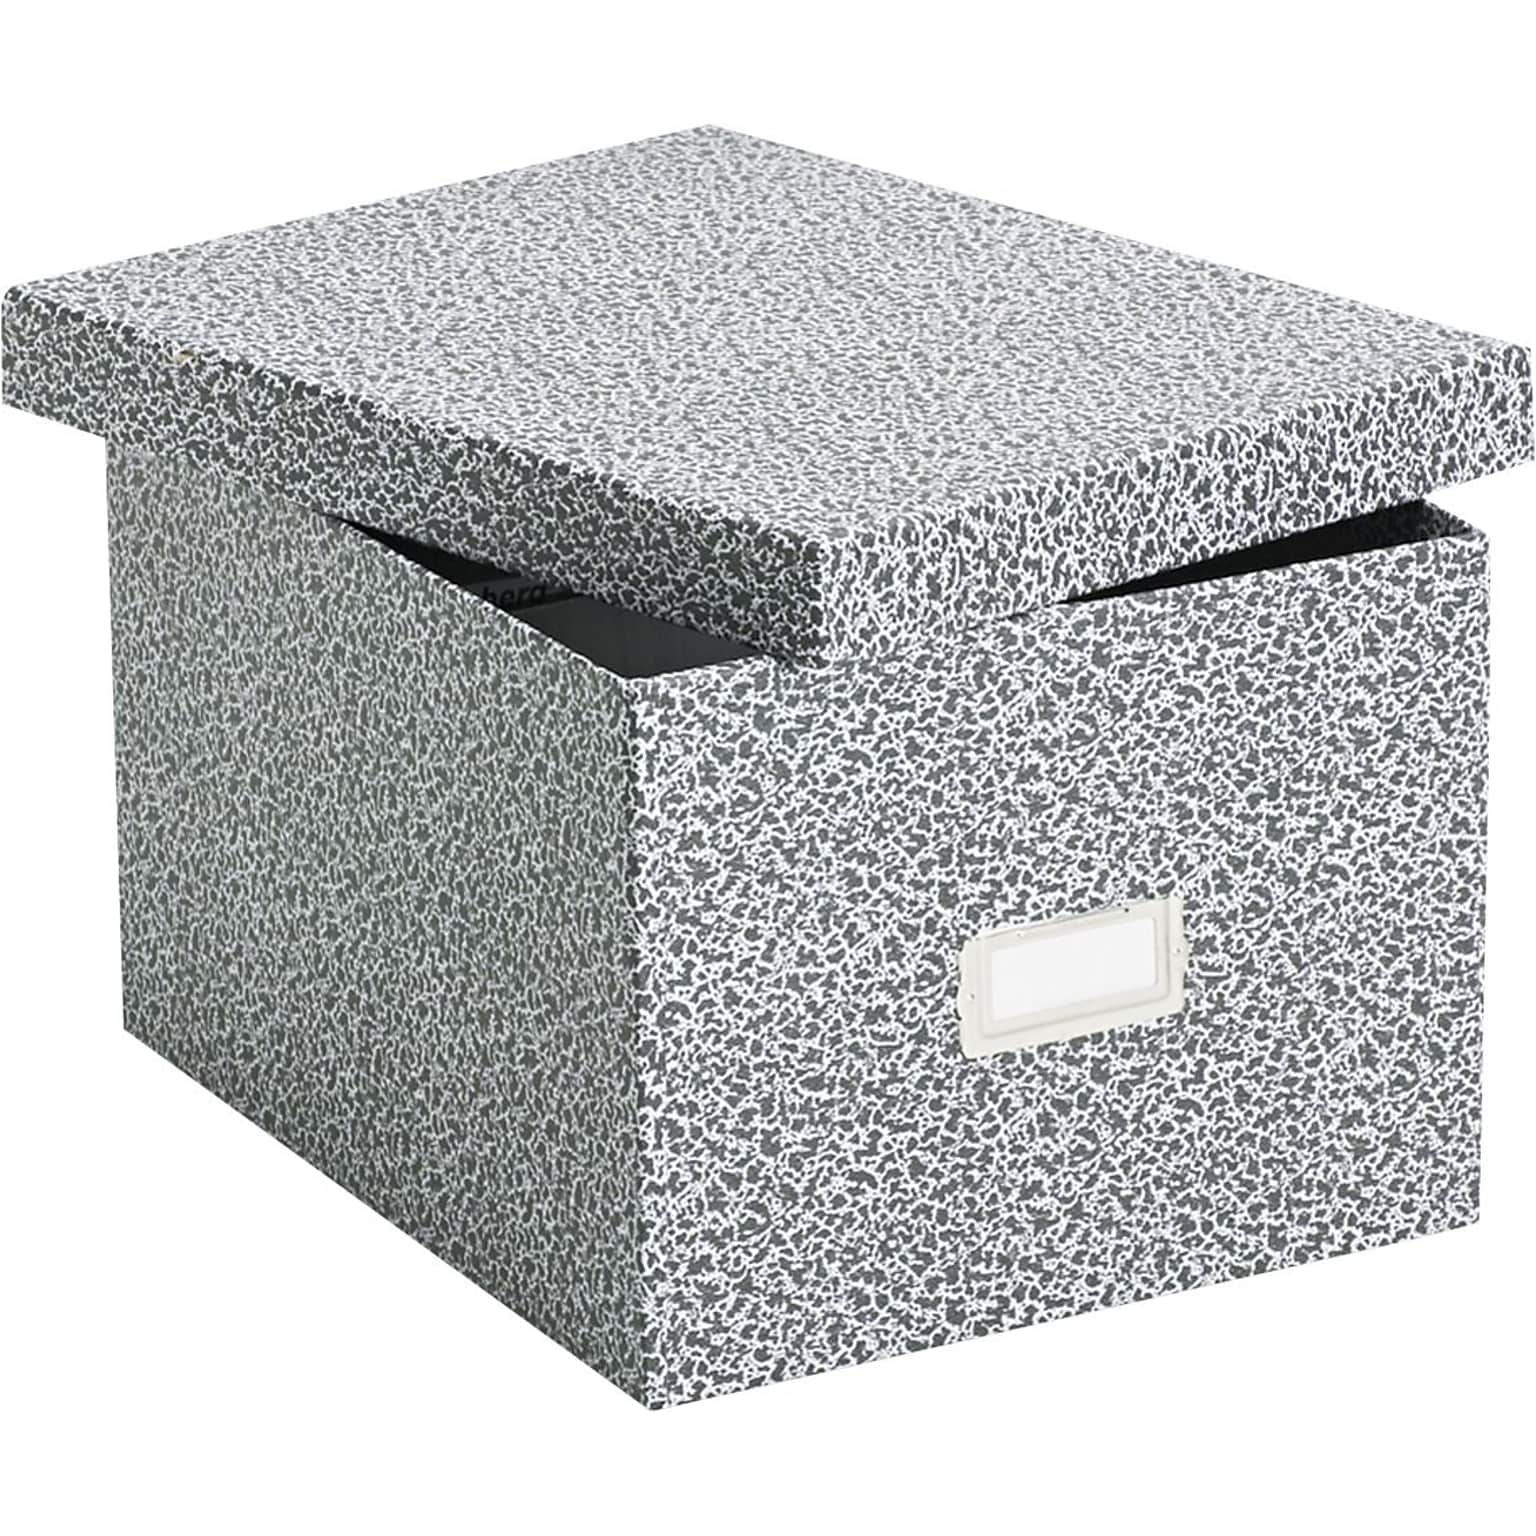 Oxford Card File with Lift-Off Lid Holds 1,200 6 x 9 Cards, Black/White Paper Board (40591)